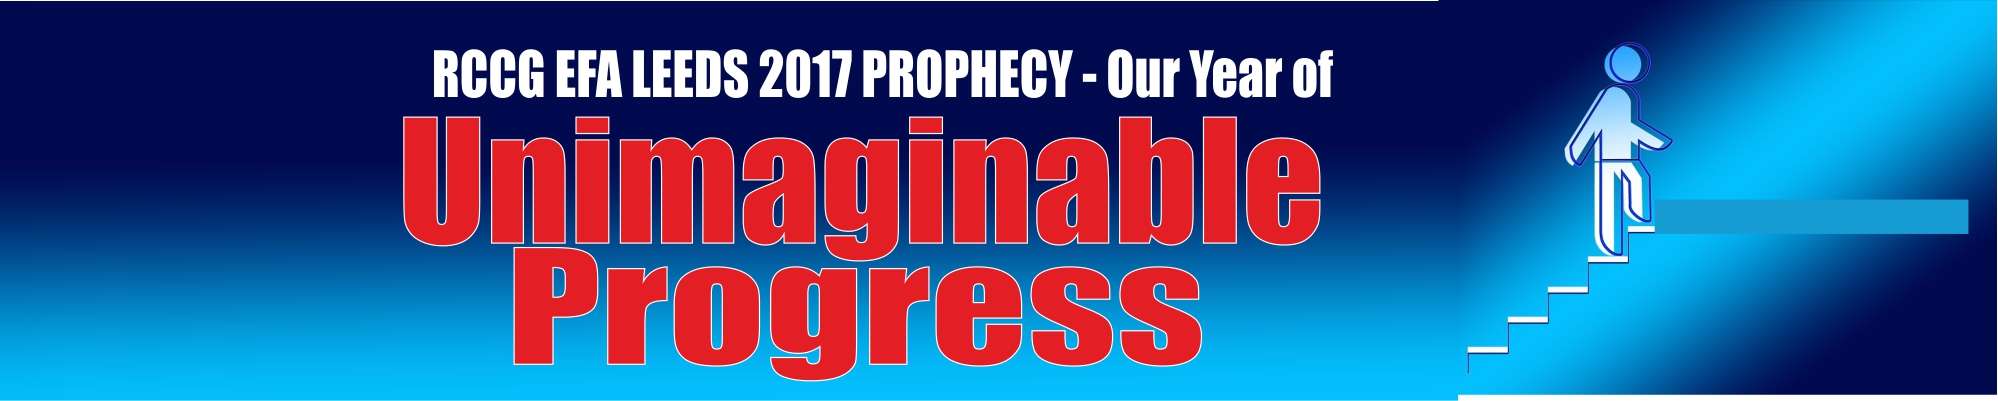 2017 – Our Year of Unimaginable Progress